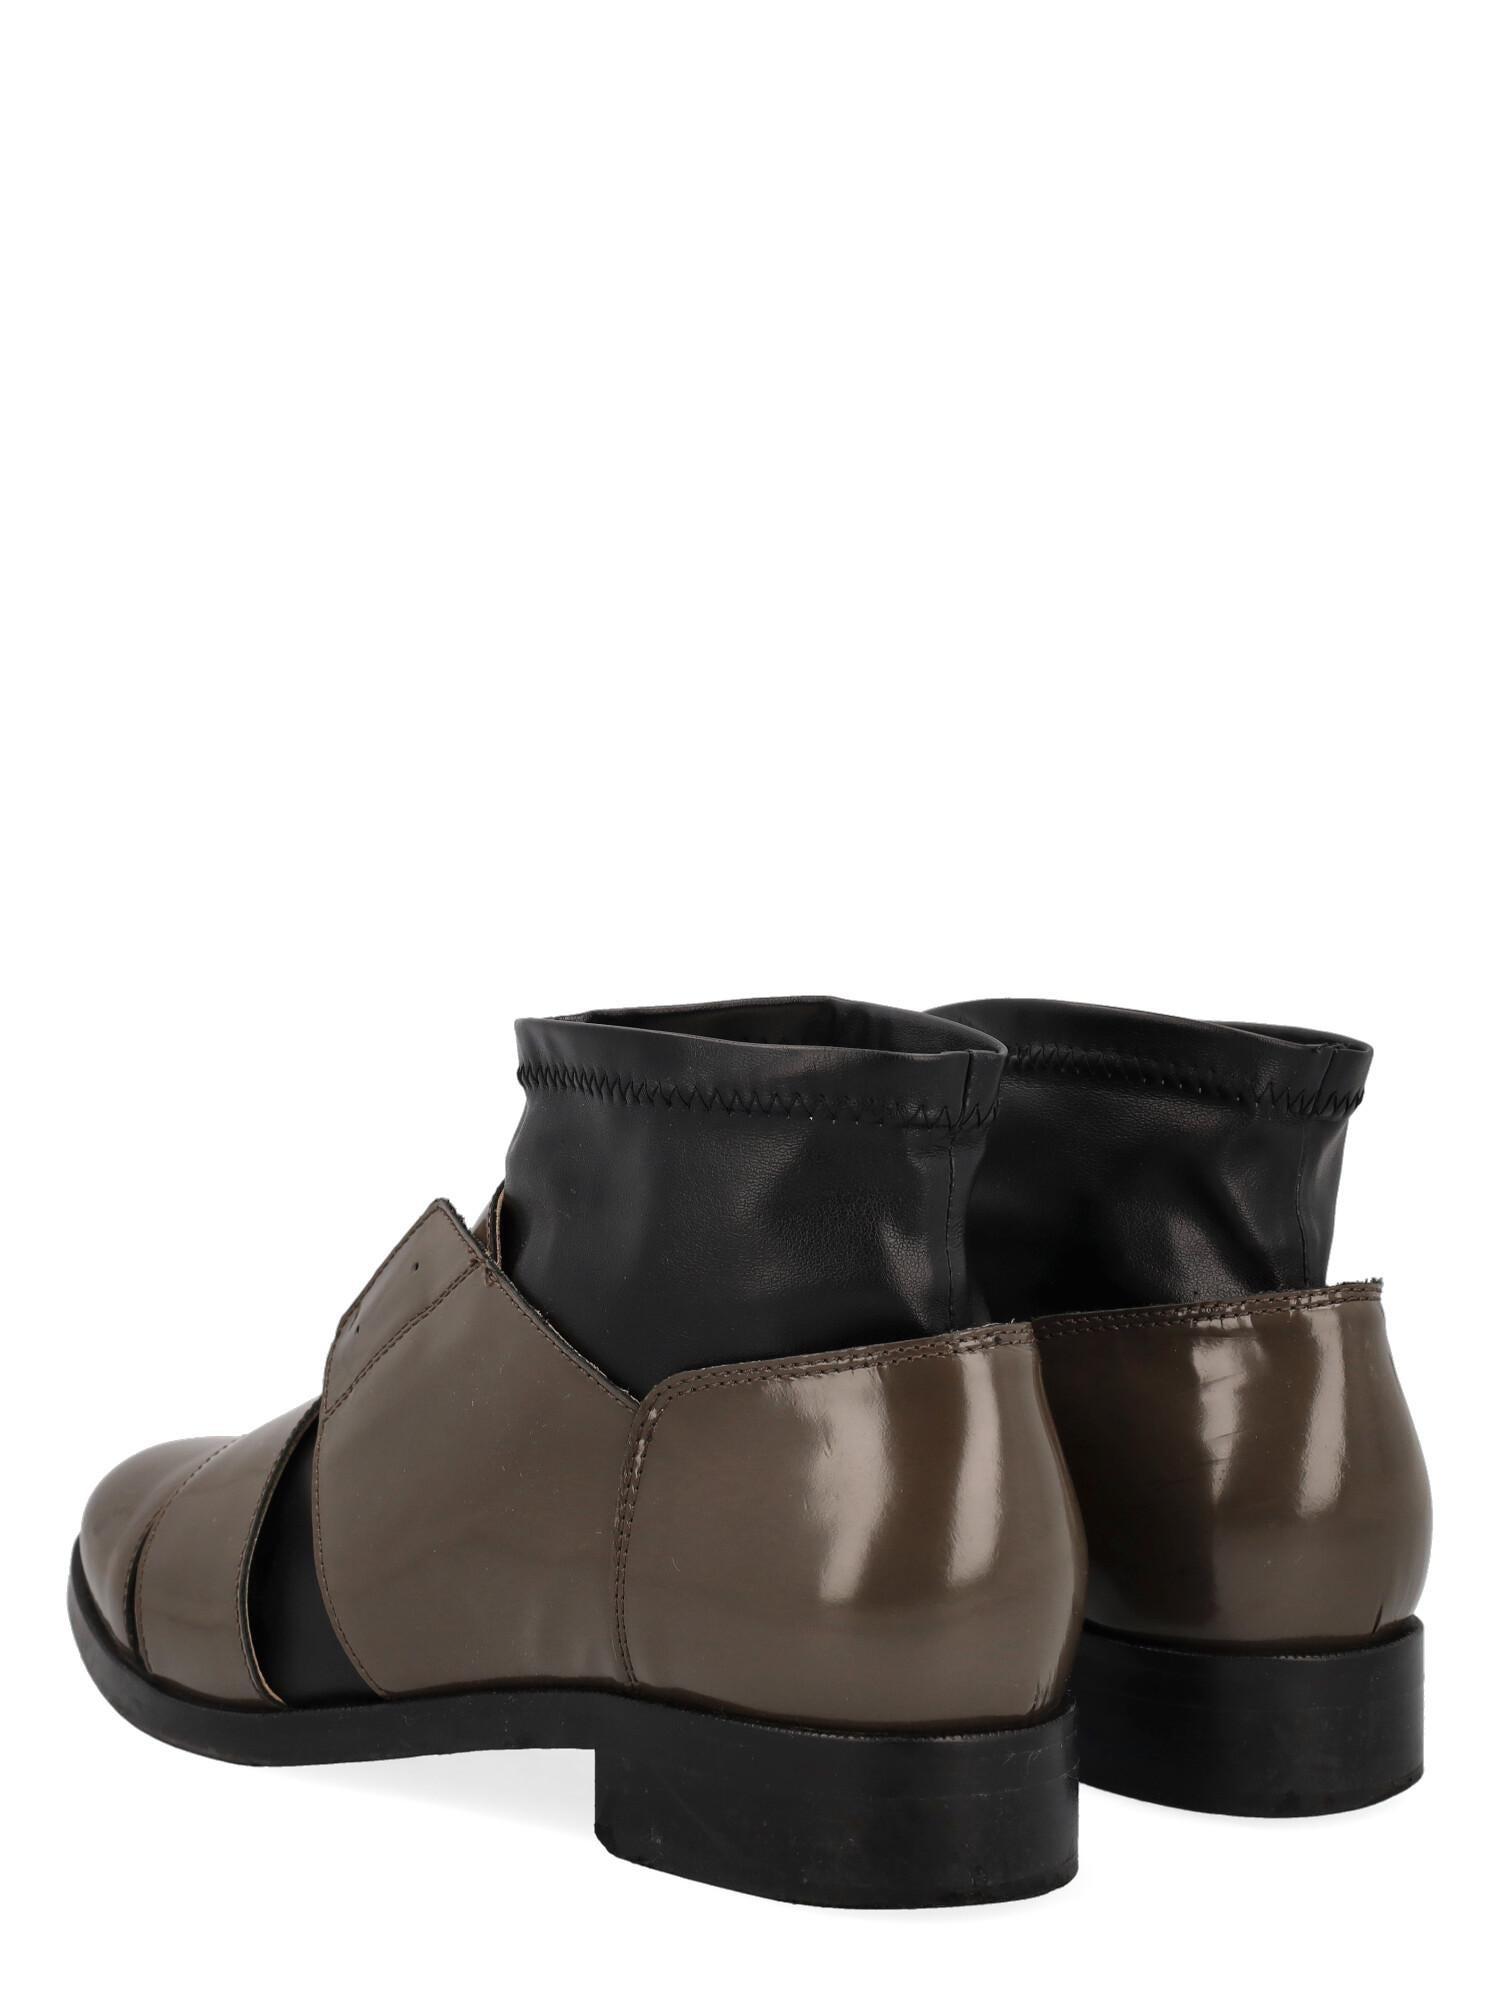 Mm6 Maison Margiela Women Ankle boots Black, Khaki Leather EU 38 In Good Condition For Sale In Milan, IT